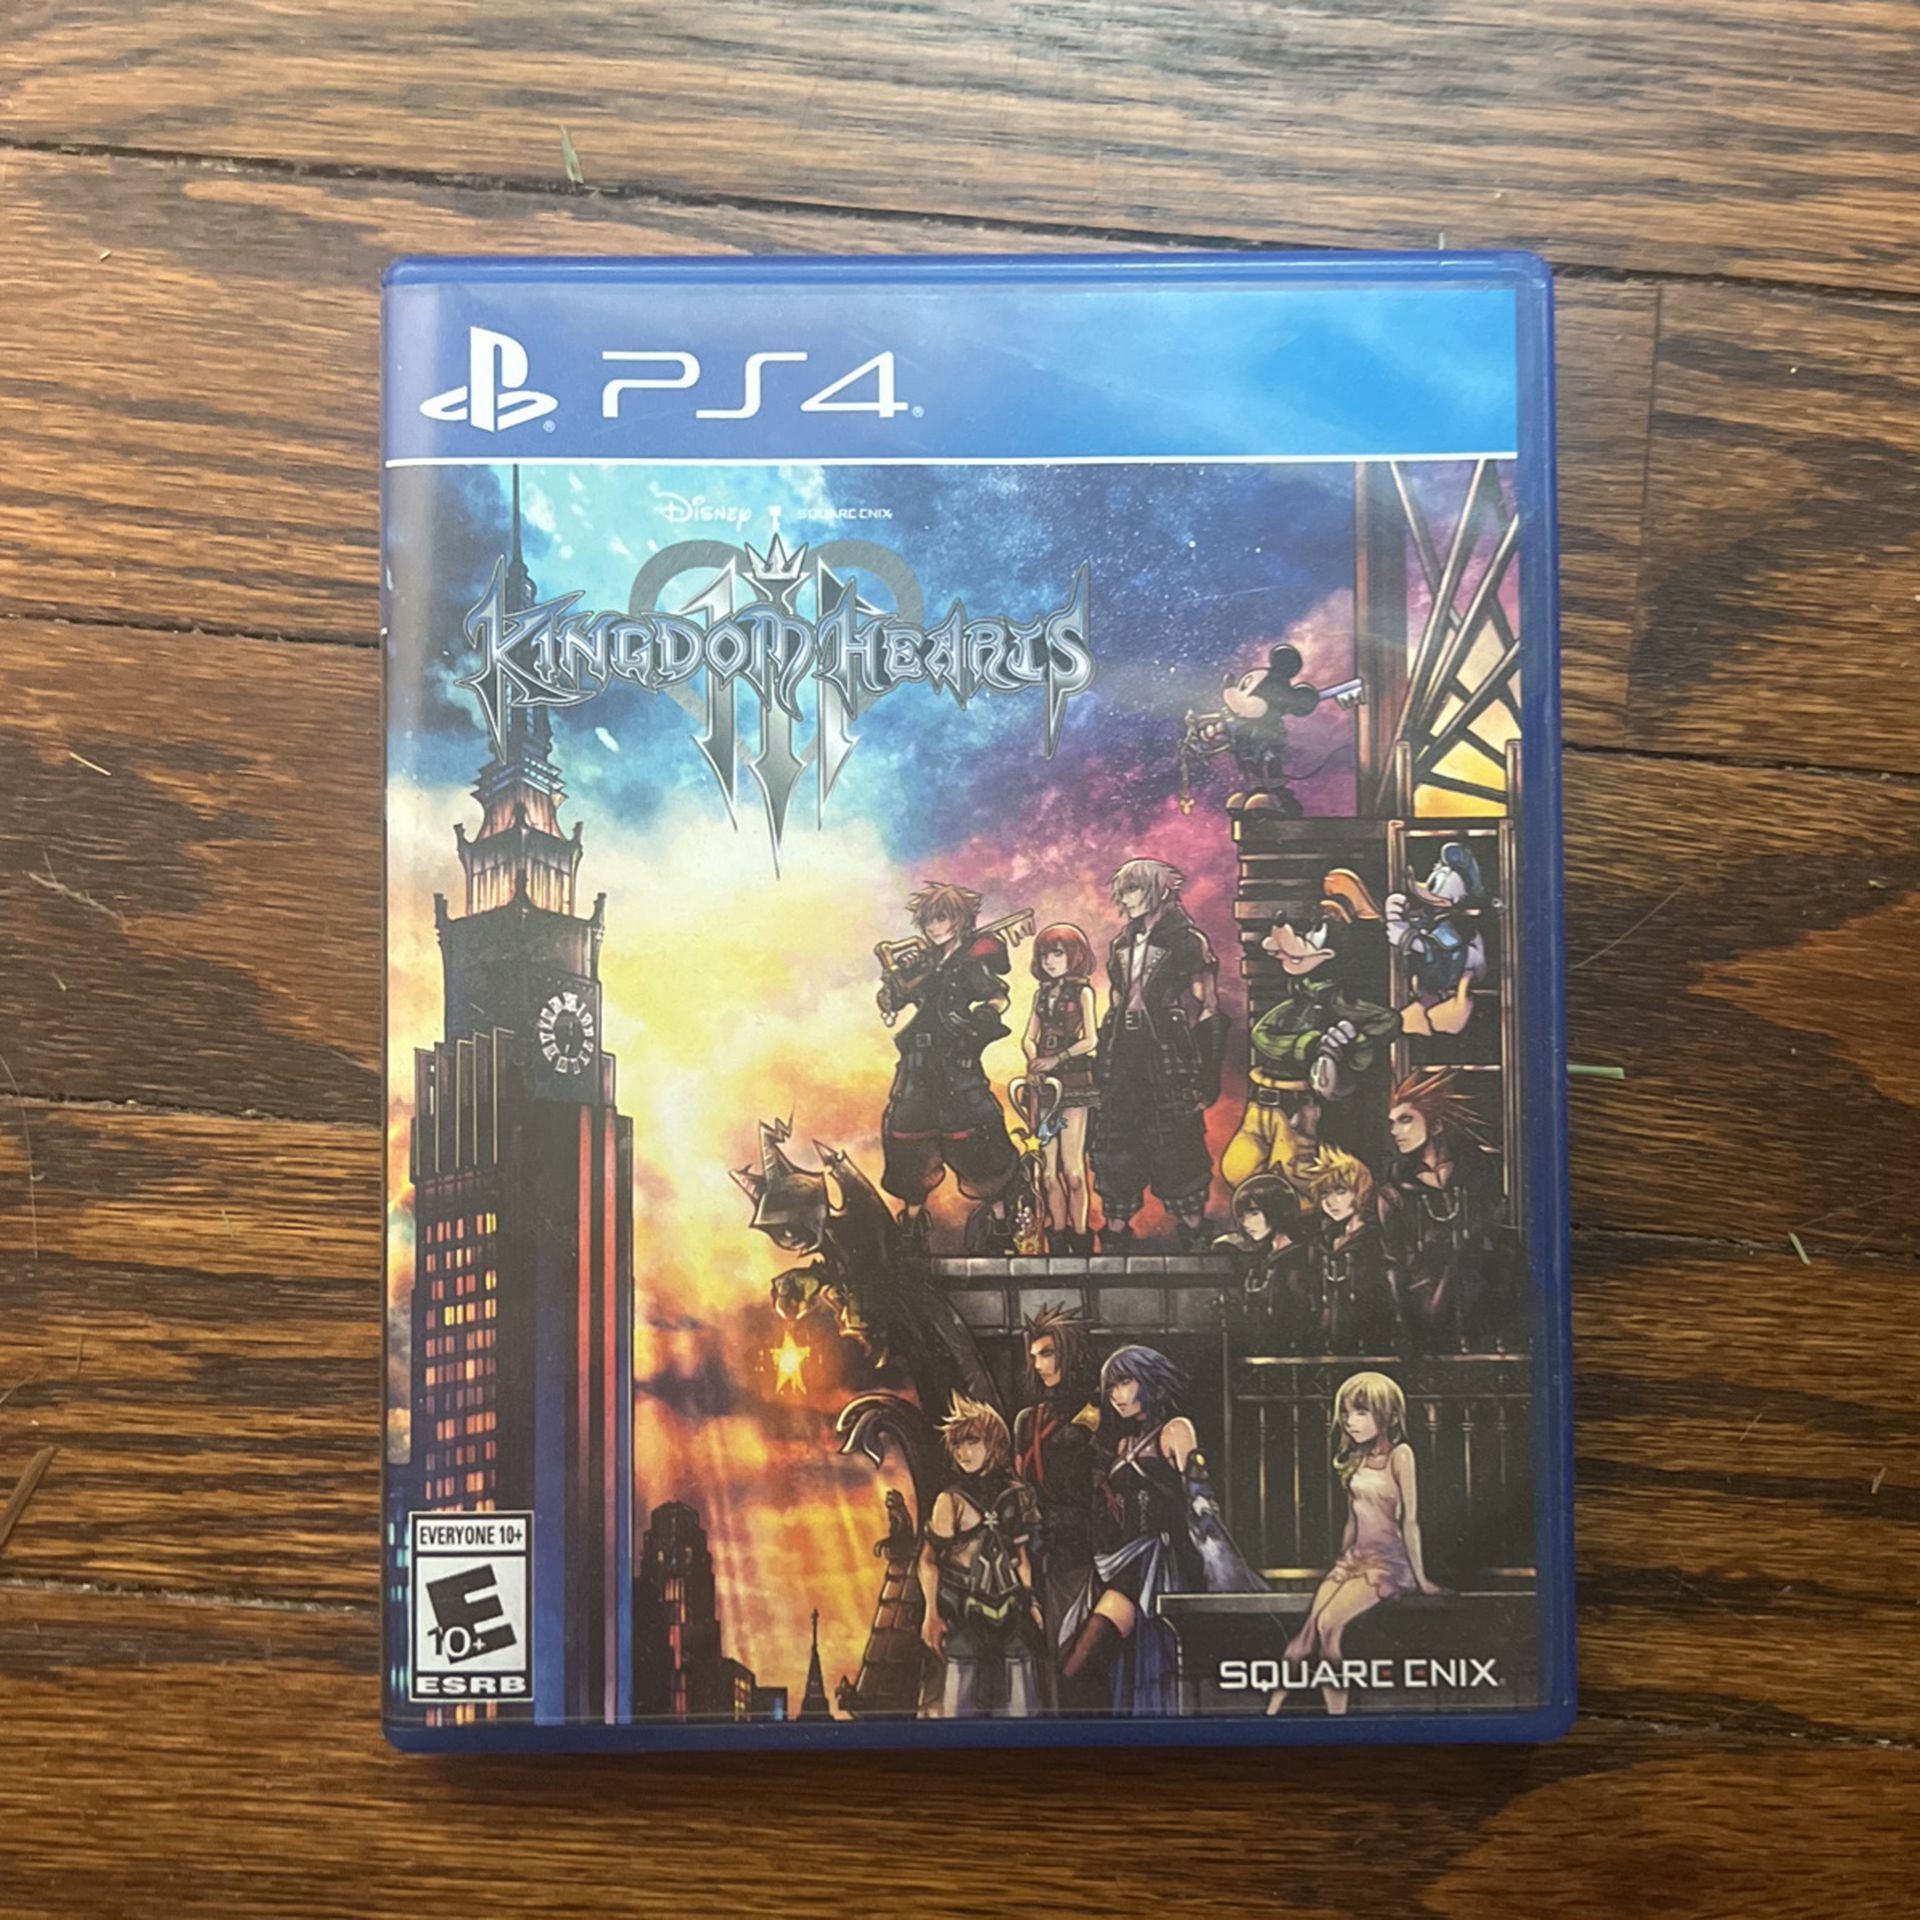 PS4 Kingdom Of Hearts Game Disc